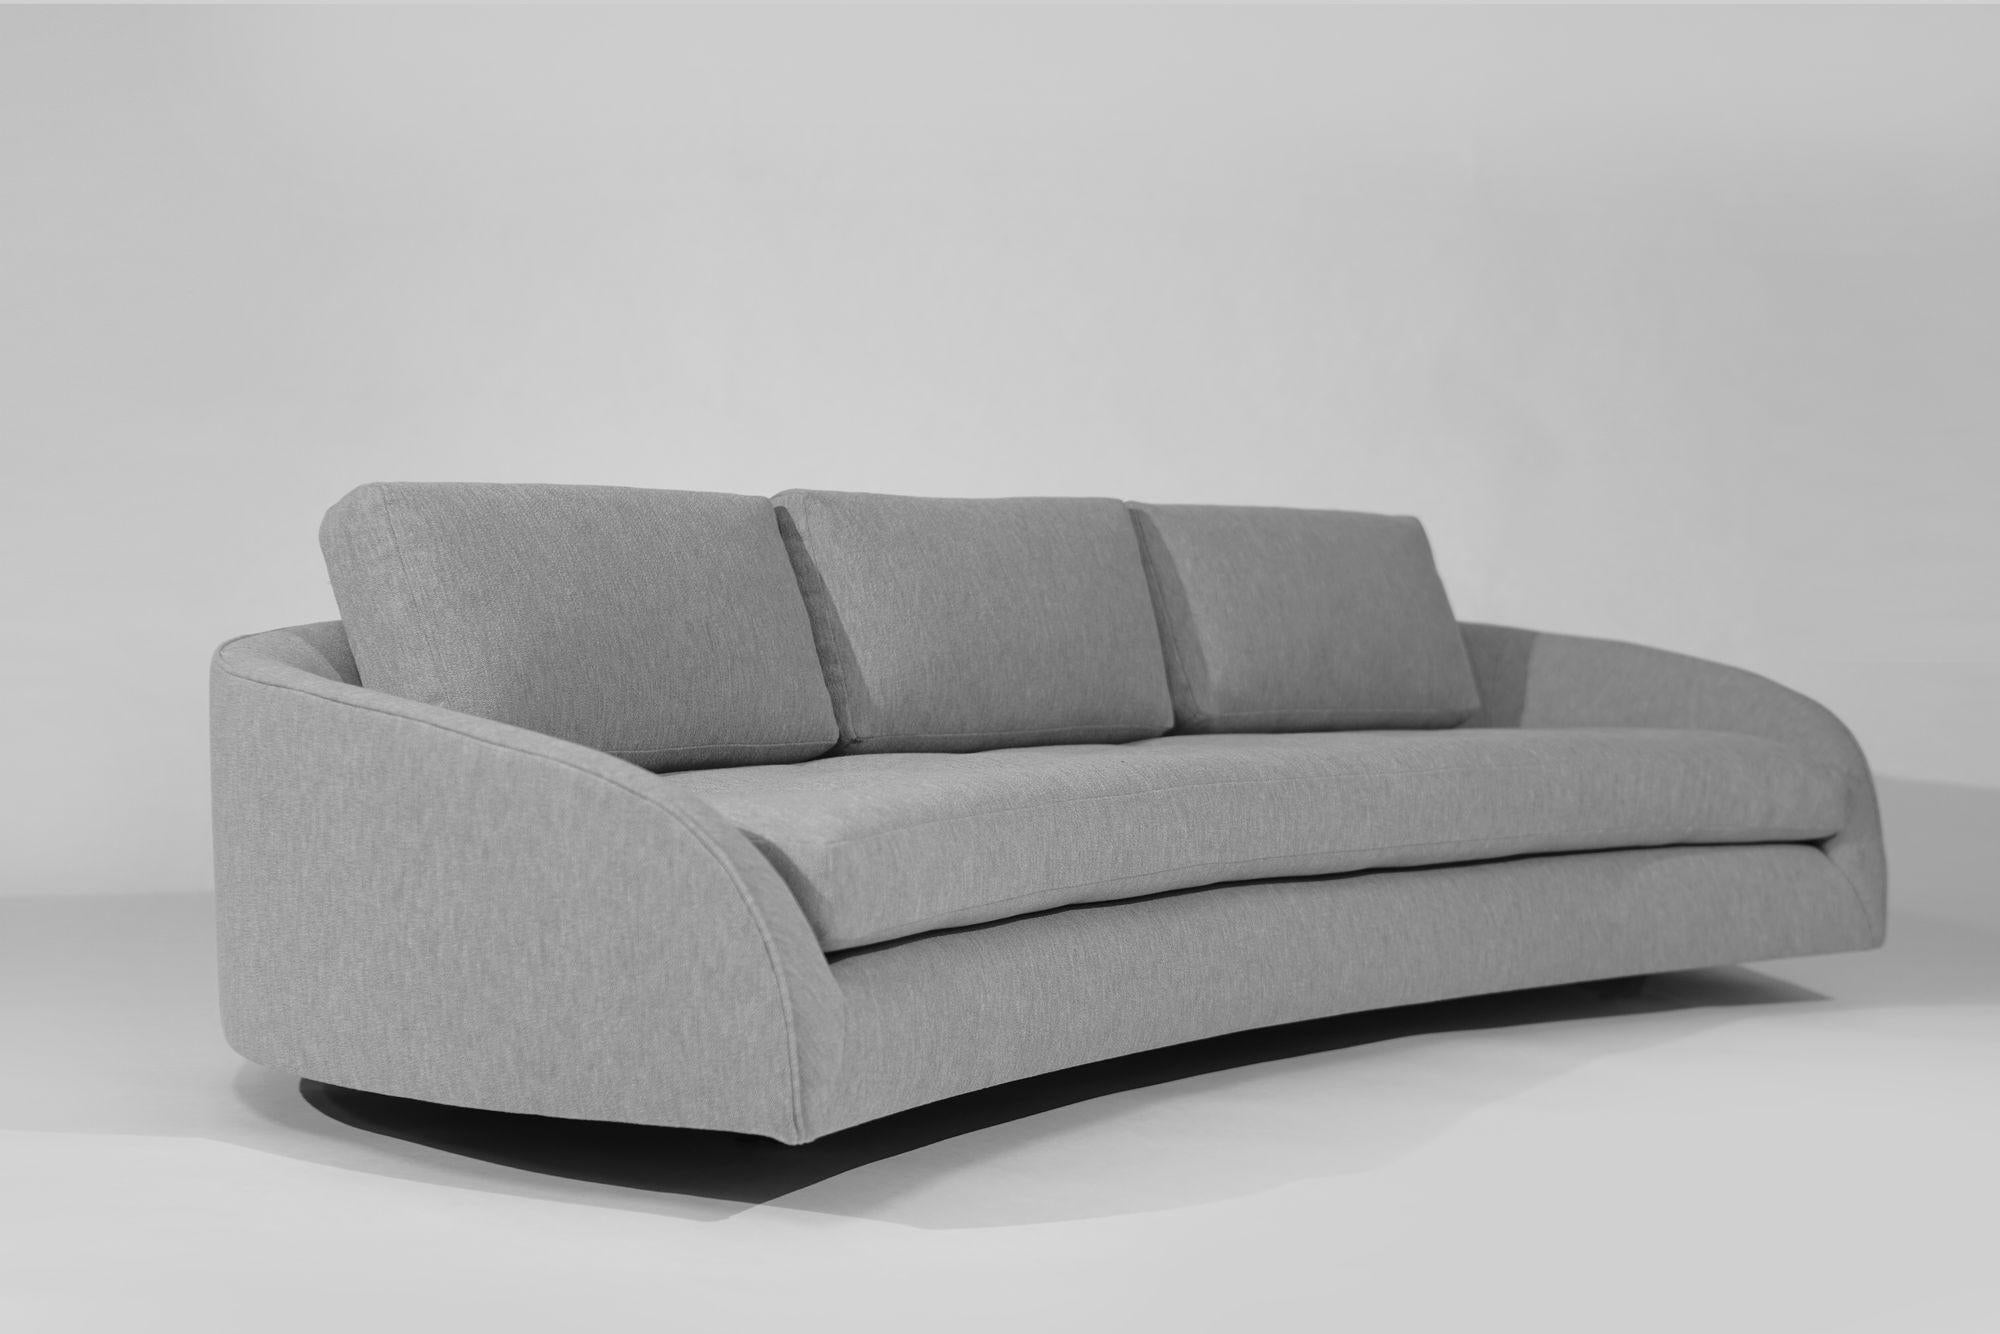 Mid-Century Modern Adrian Pearsall for Craft Associates Cloud Sofa, C. 1950s For Sale